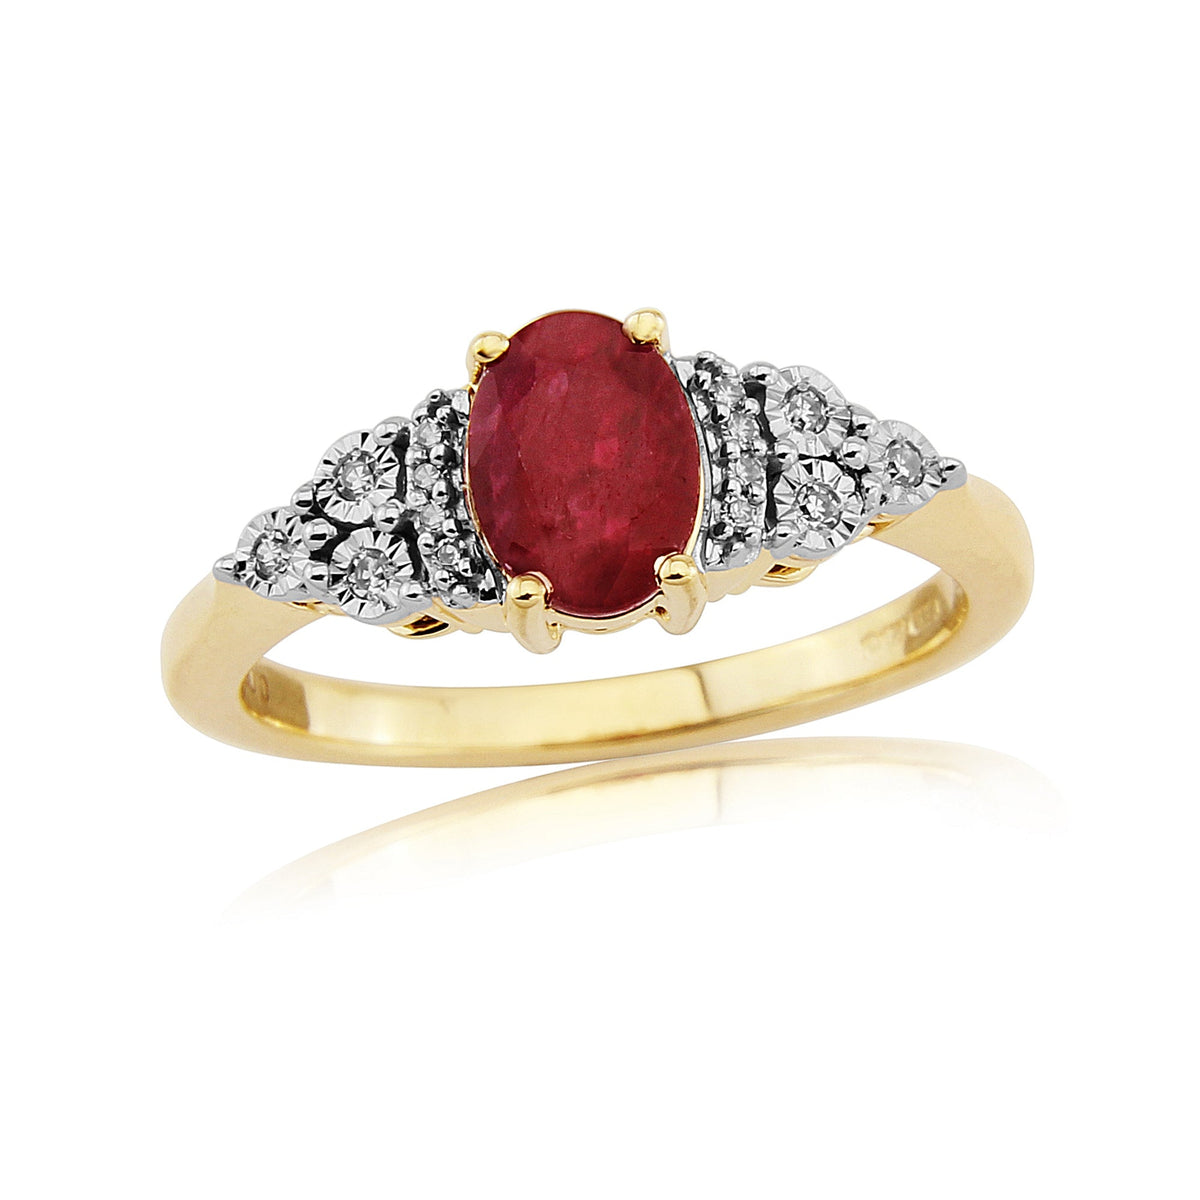 9ct gold 7x5mm oval ruby &amp; miracle plate diamond ring 0.06ct